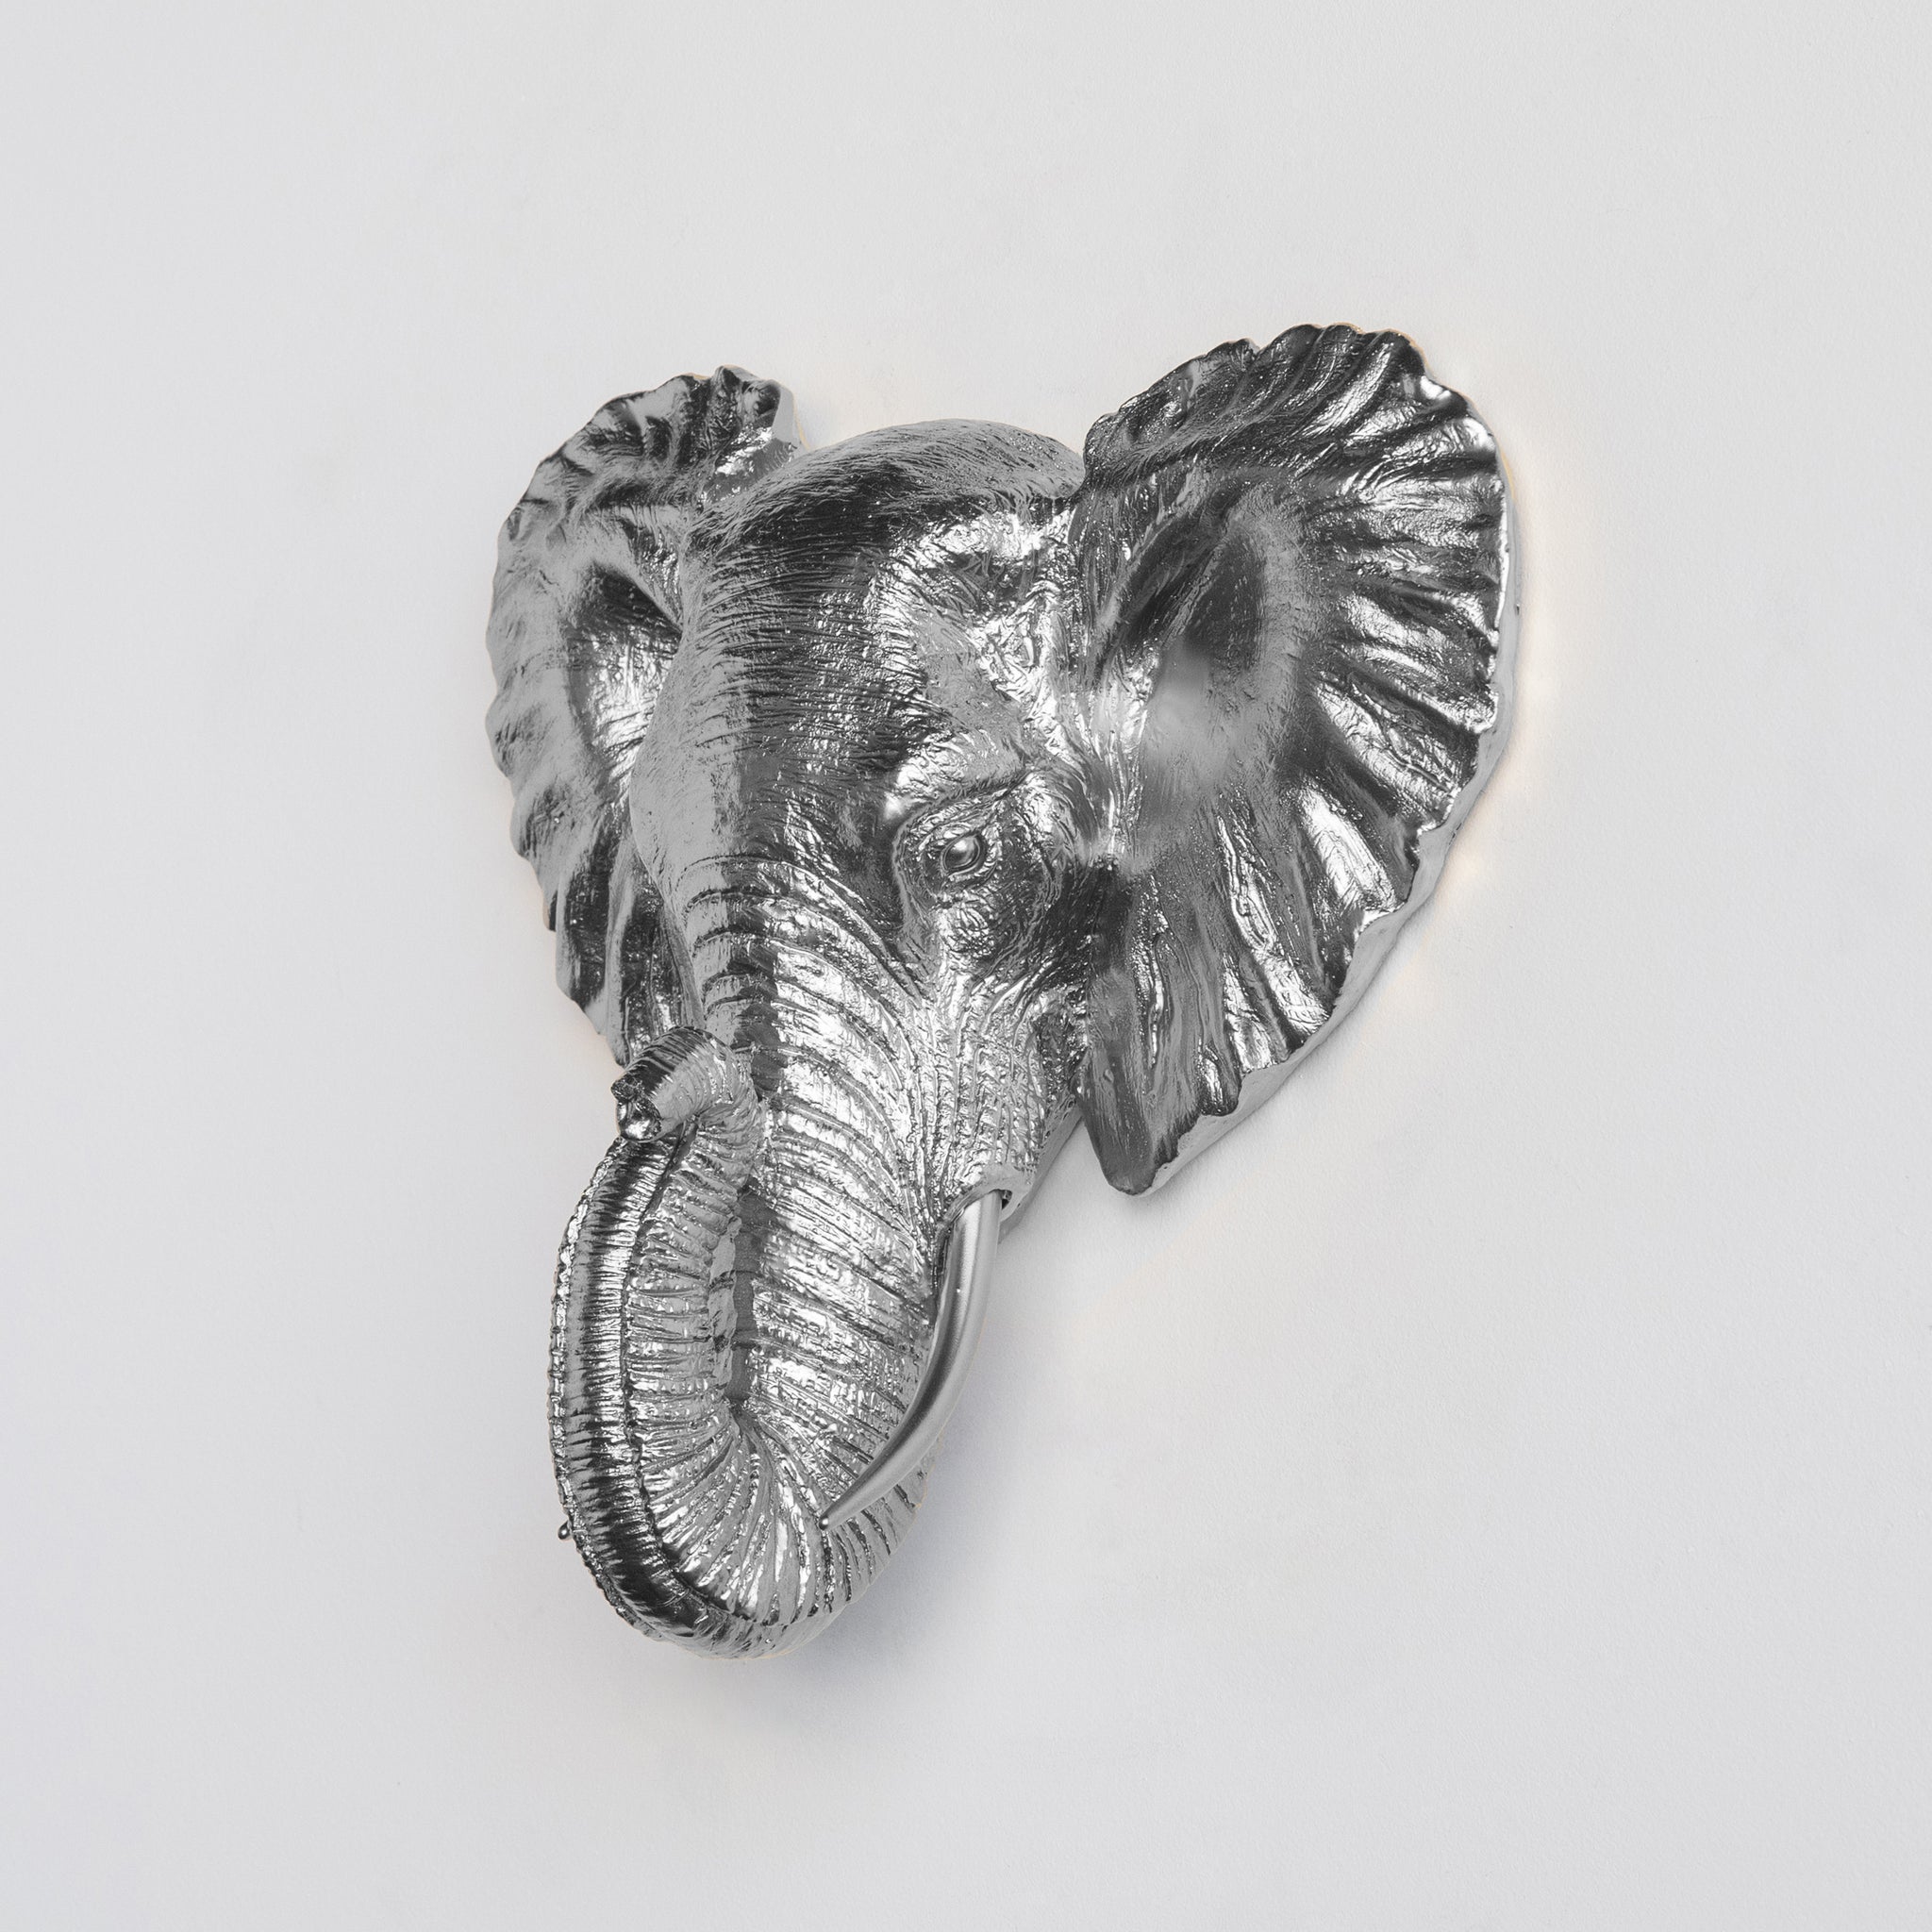 Faux Small Elephant Wall Mount // Silver